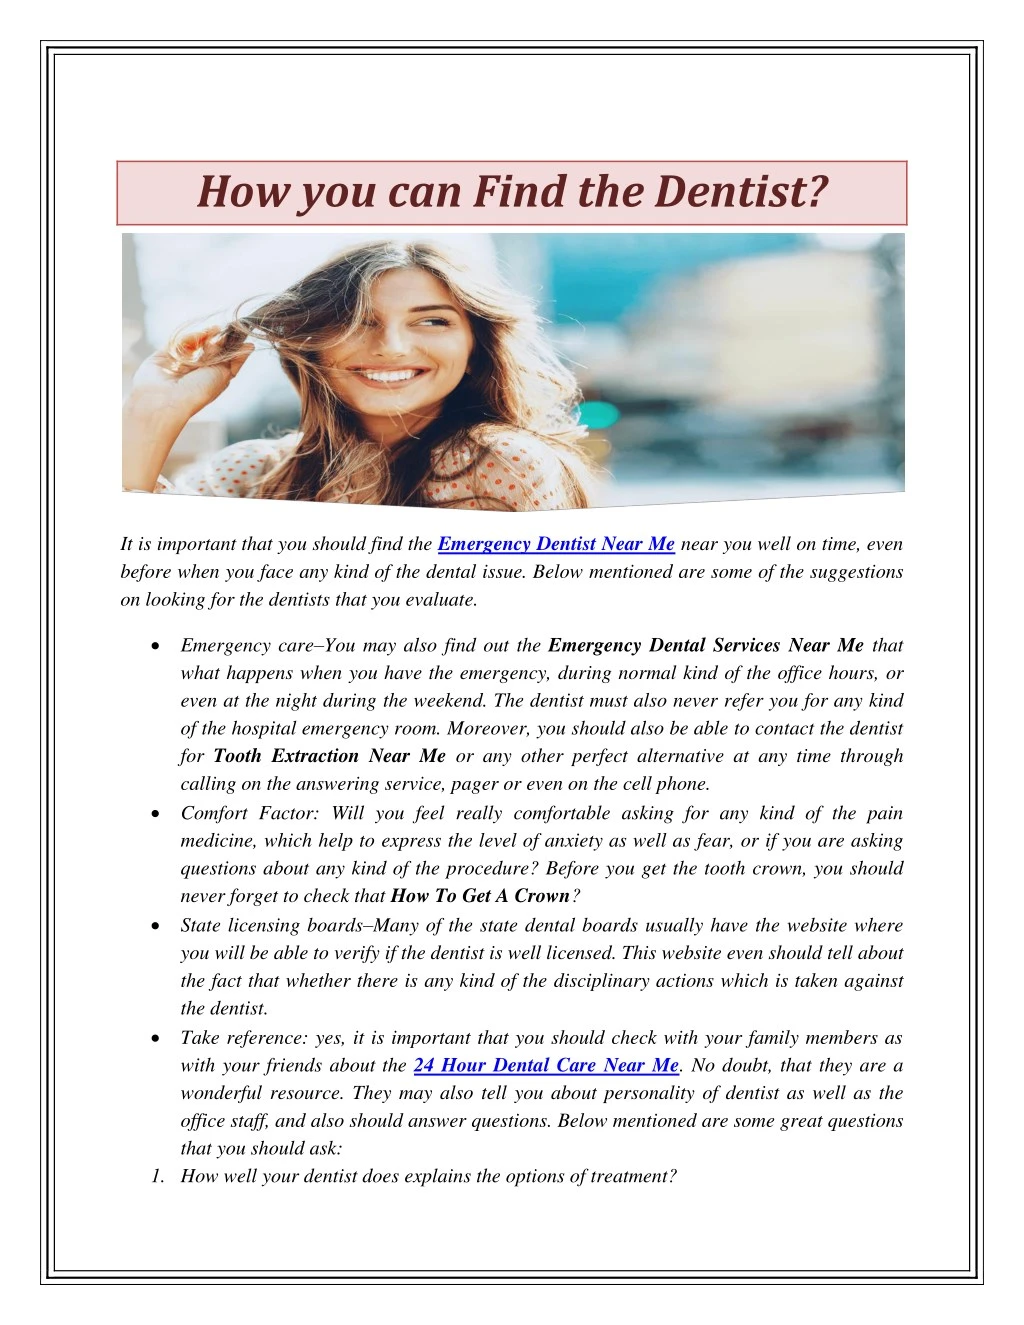 how you can find the dentist